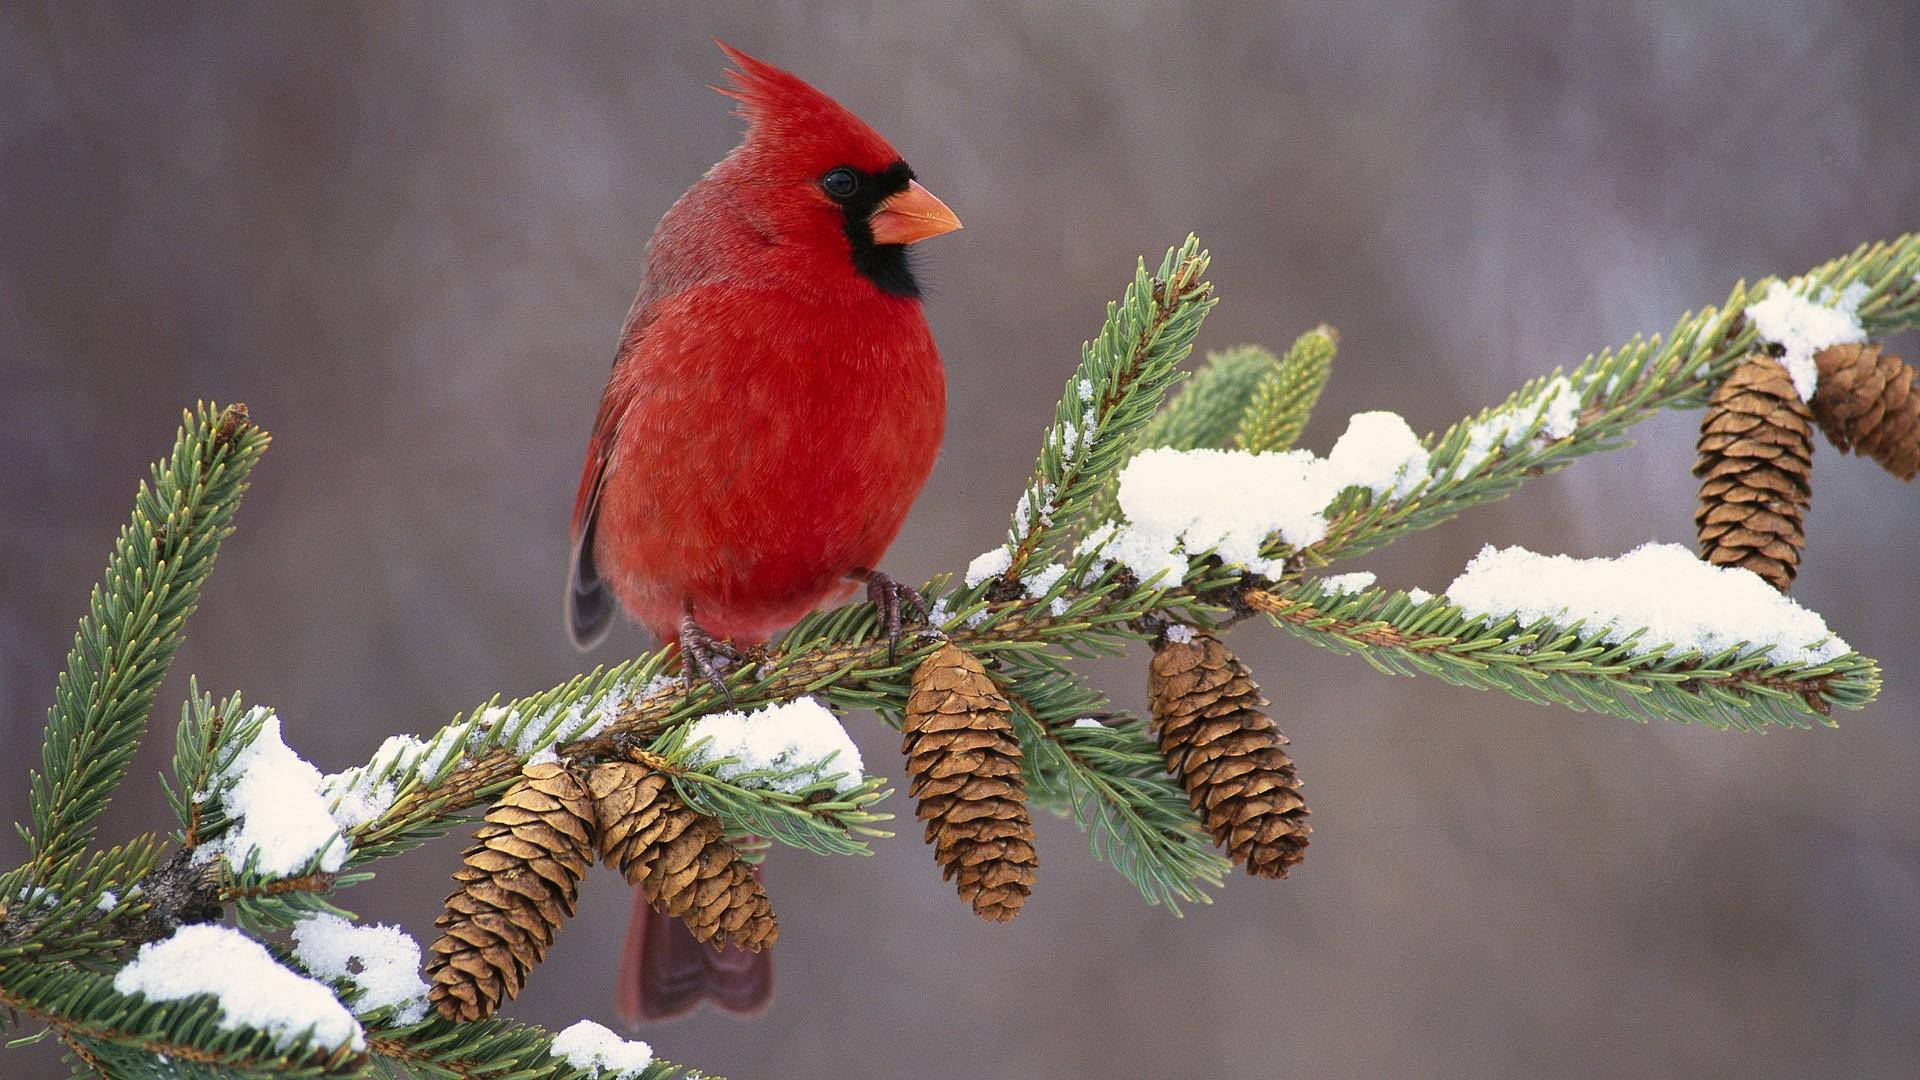 Majestic Red Cardinal Perched on Pinecones Wallpaper